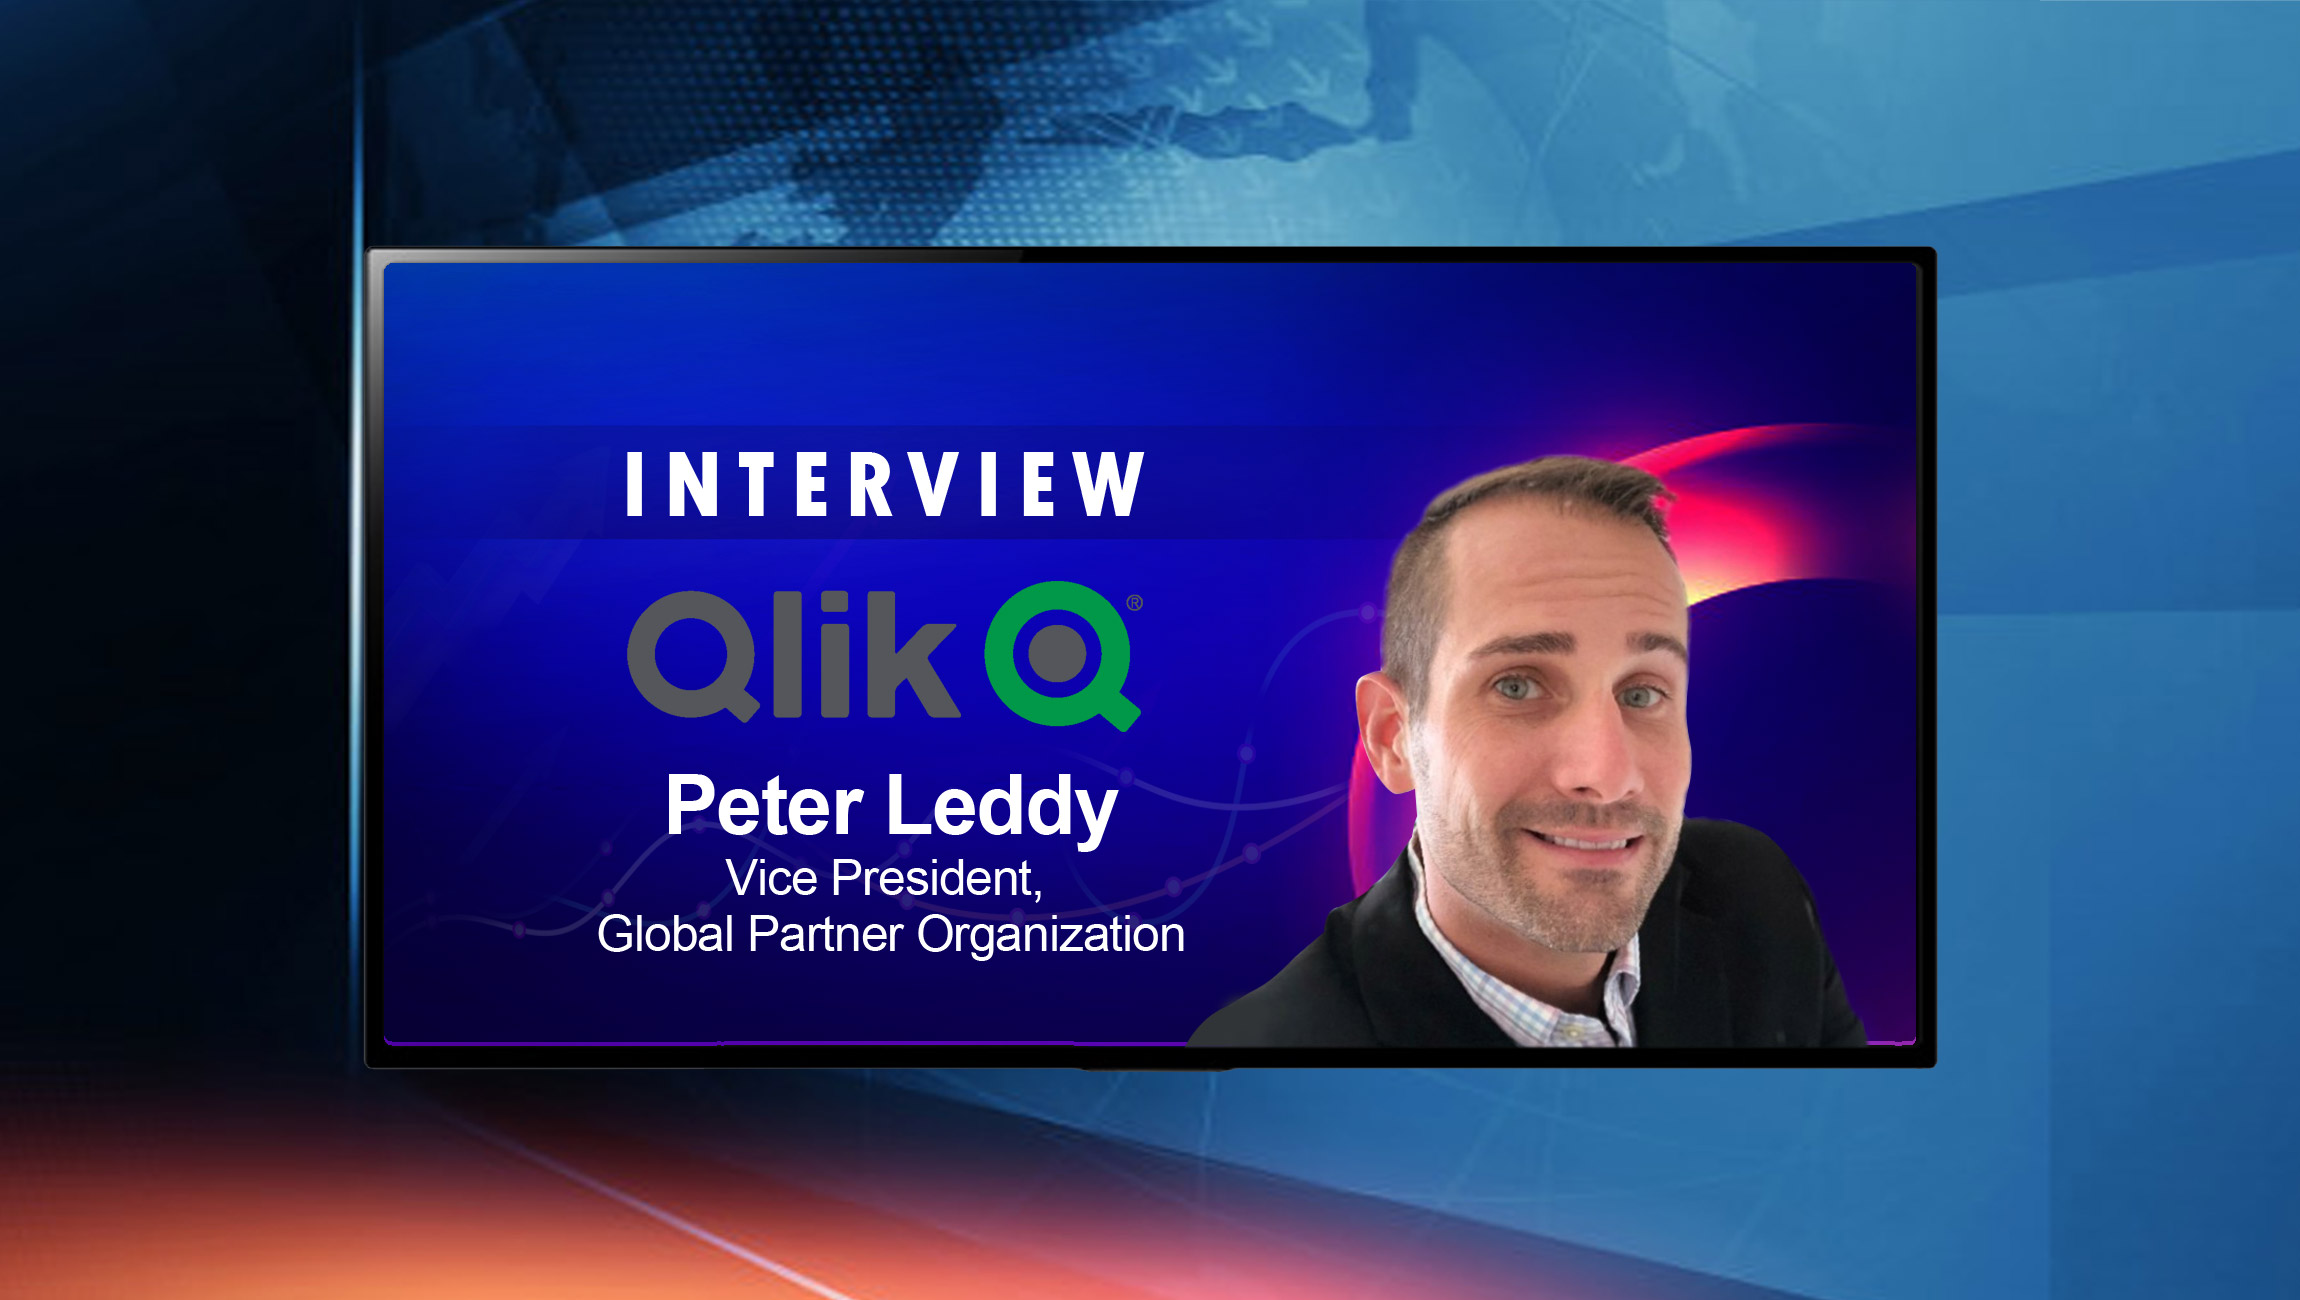 SalesTechStar Interview with Peter Leddy, Vice President, Global Partner Organization at Qlik